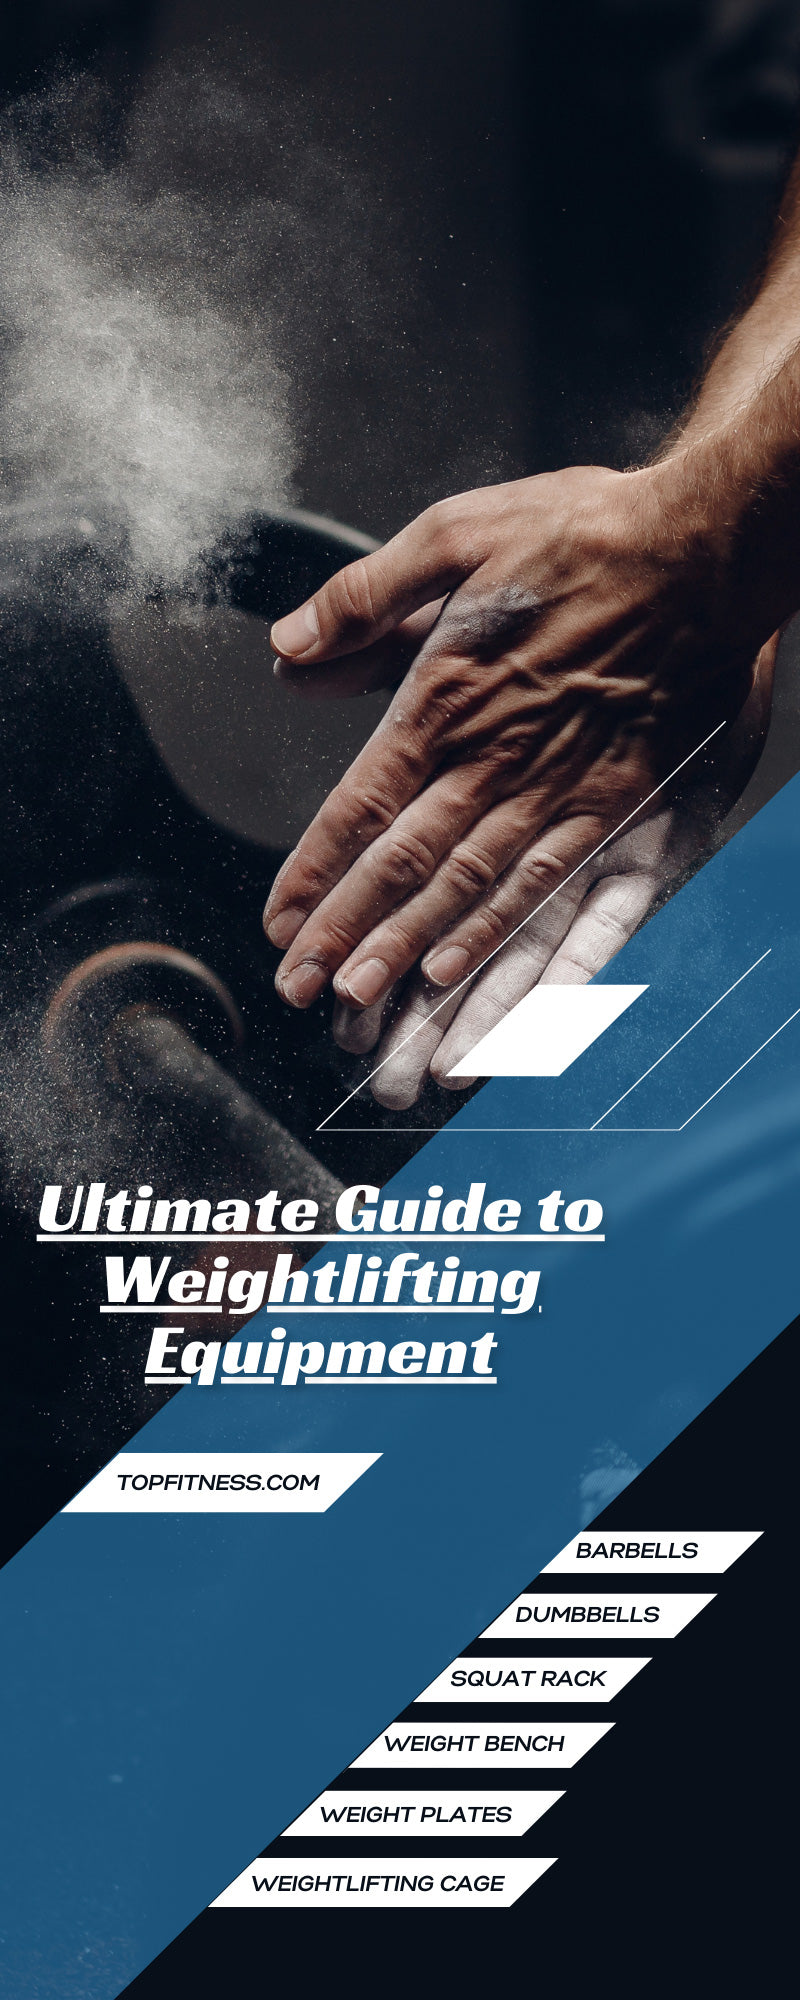 Ultimate Guide to Weightlifting Equipment